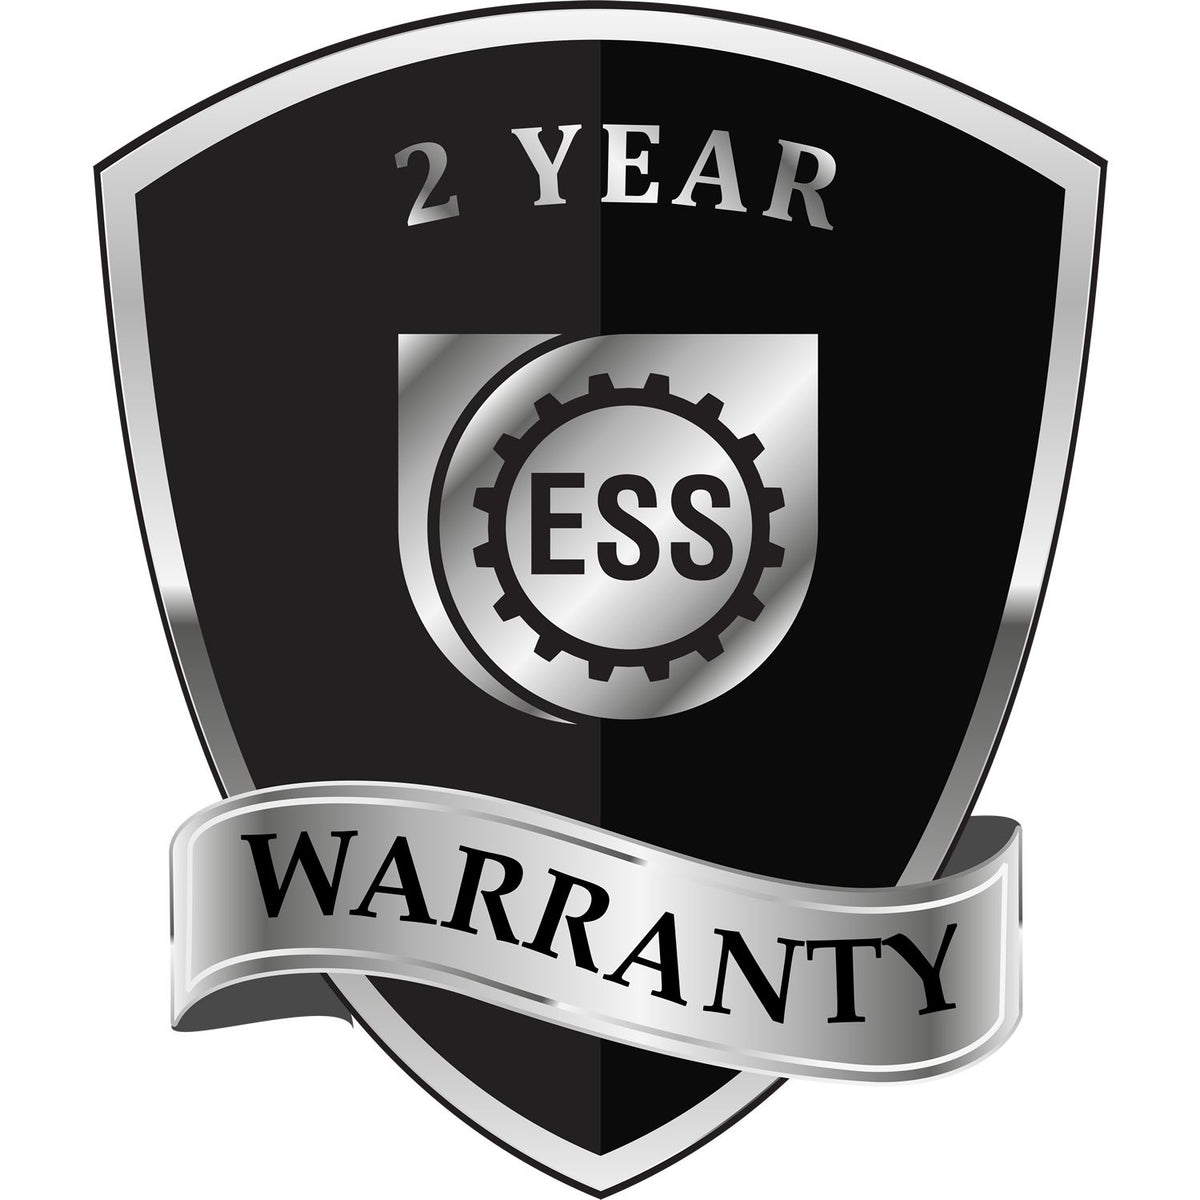 A badge or emblem showing a warranty icon for the Heavy Duty Cast Iron Connecticut Engineer Seal Embosser